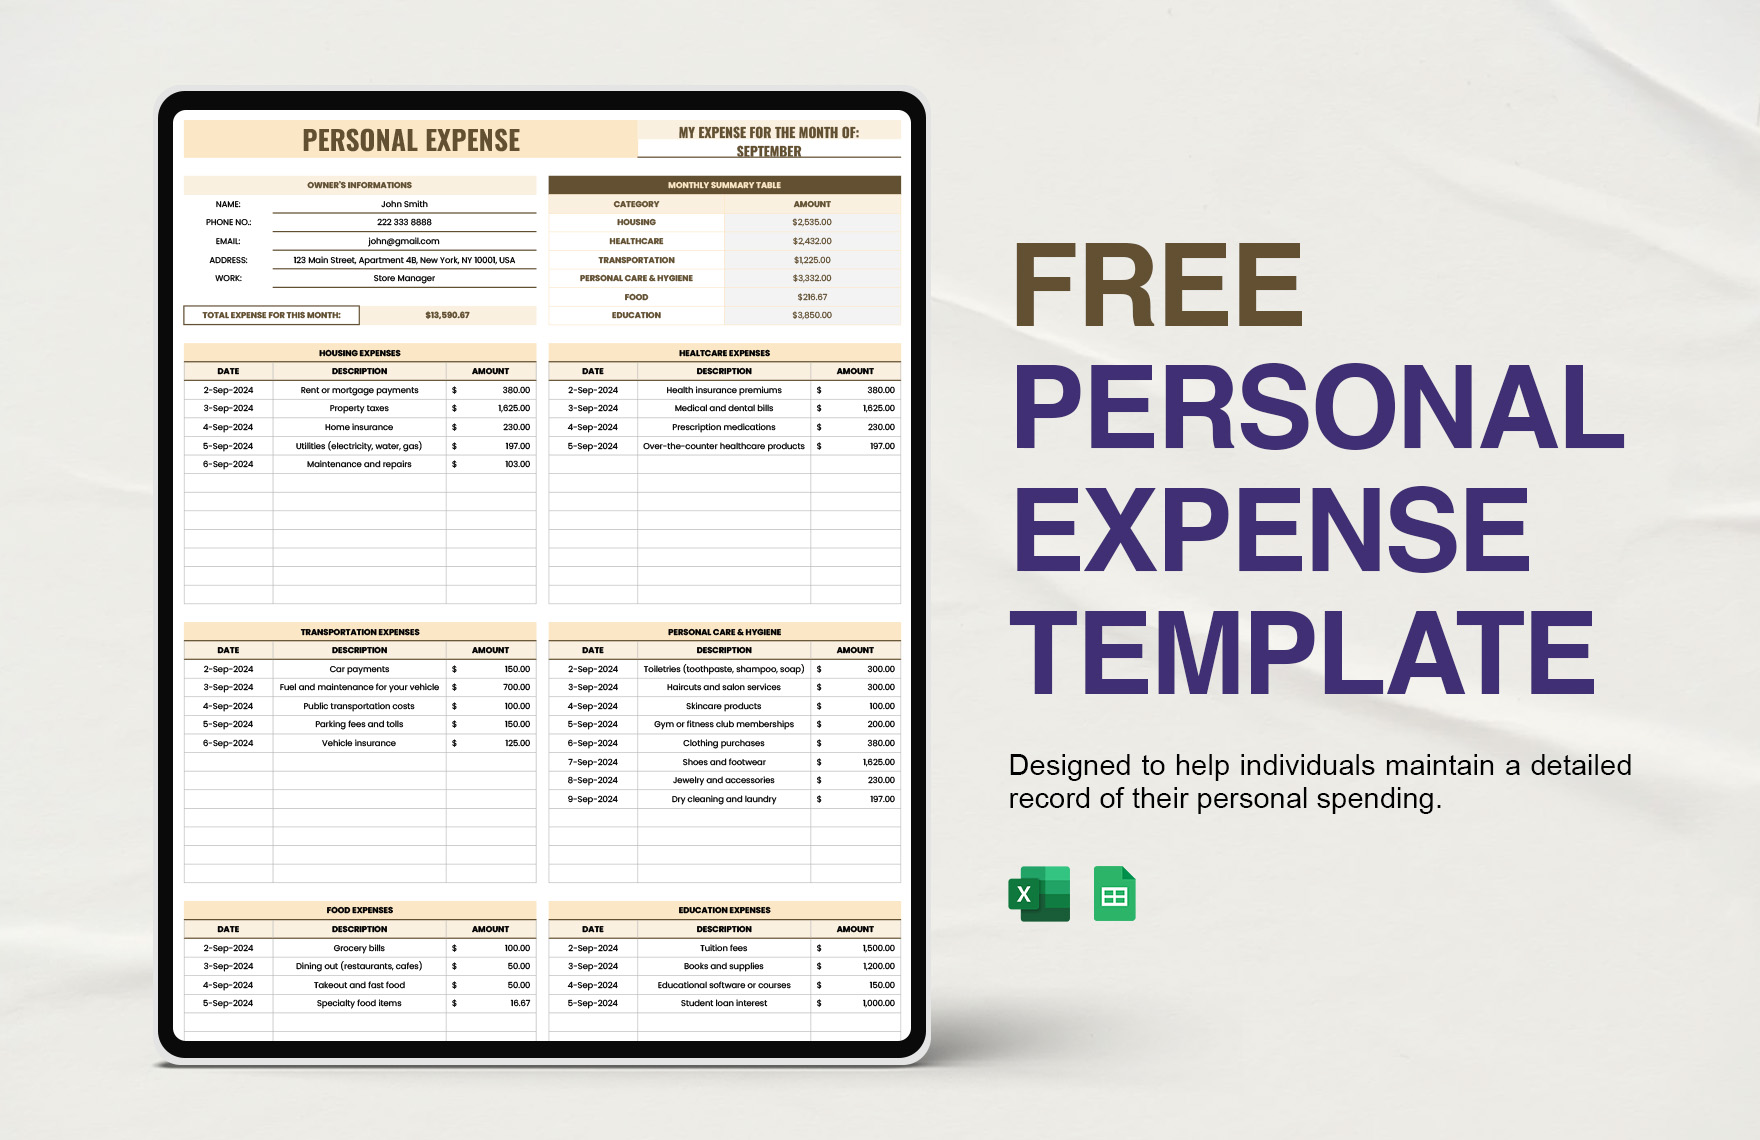 Free Personal Expense Template in Excel, Google Sheets